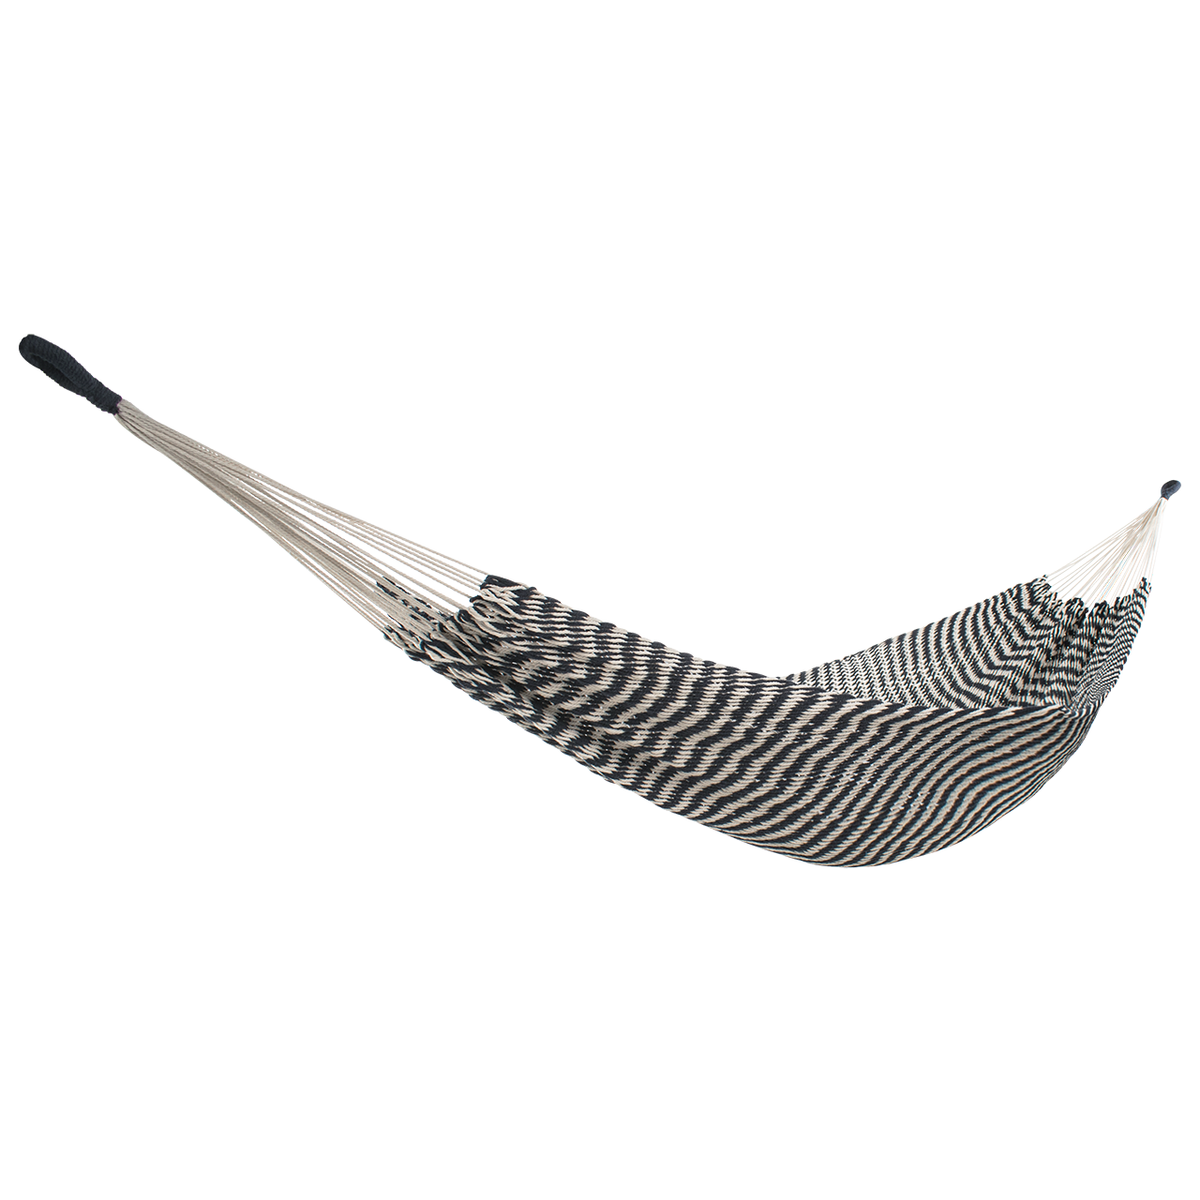 Bliss Hammocks 39-inch Brazilian Style Rope Hammock with Braided Rope Ends with a zebra-like pattern.